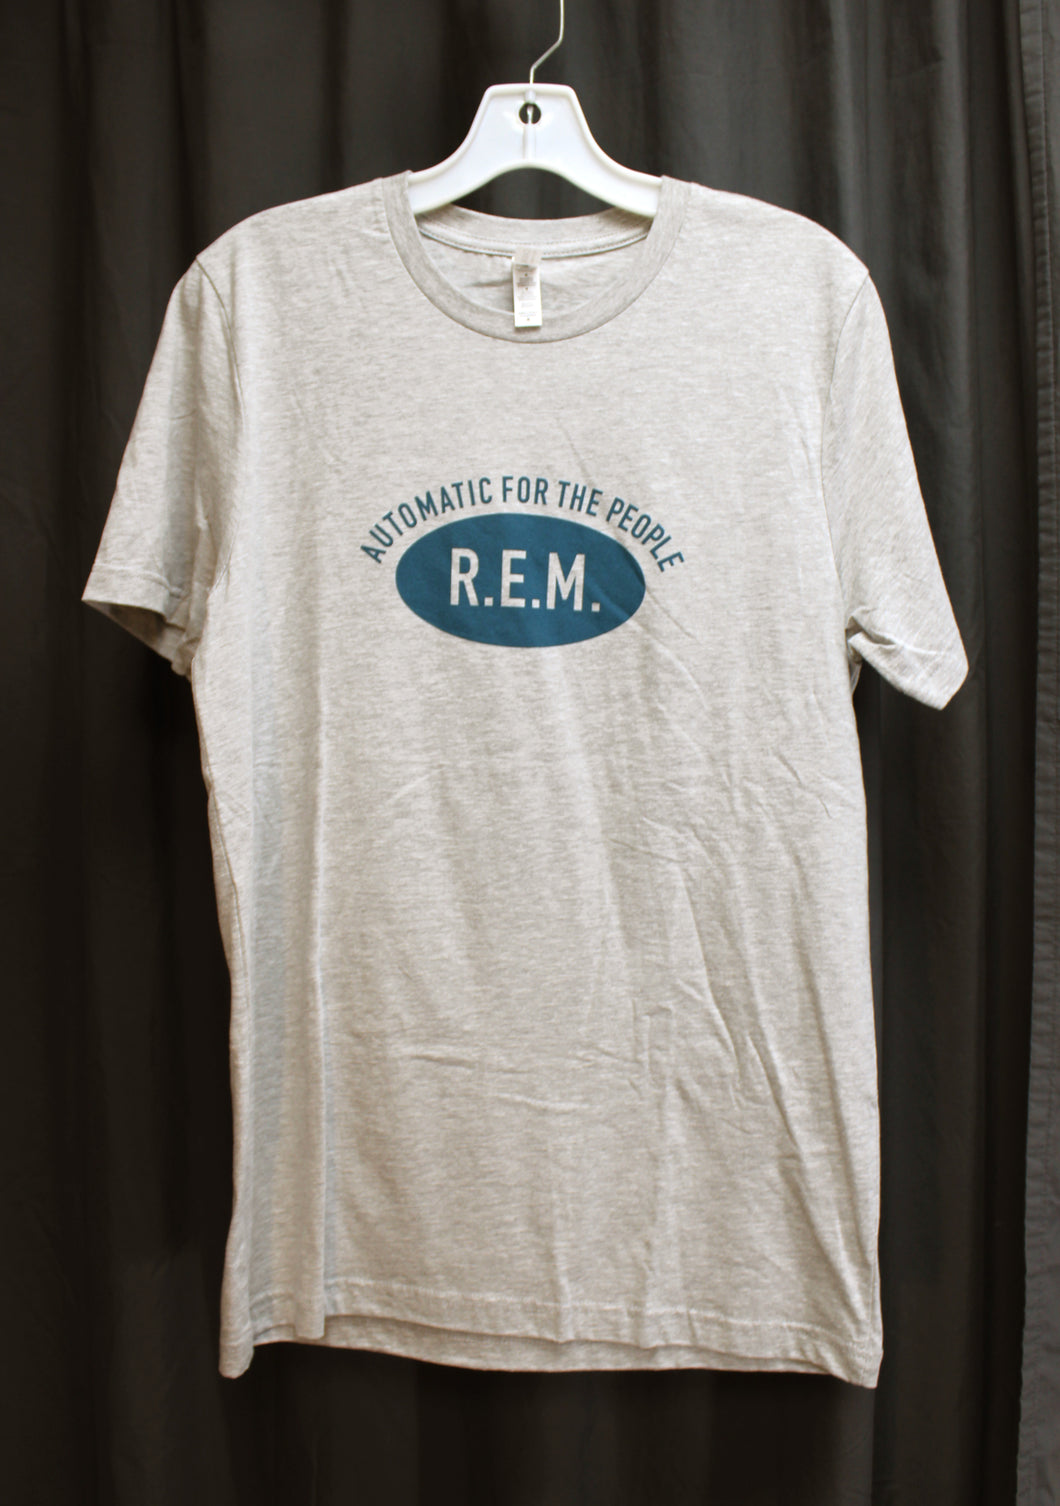 R.E.M. - Automatic for the People - 2 Sided Heathered Gray T-Shirt - Size M